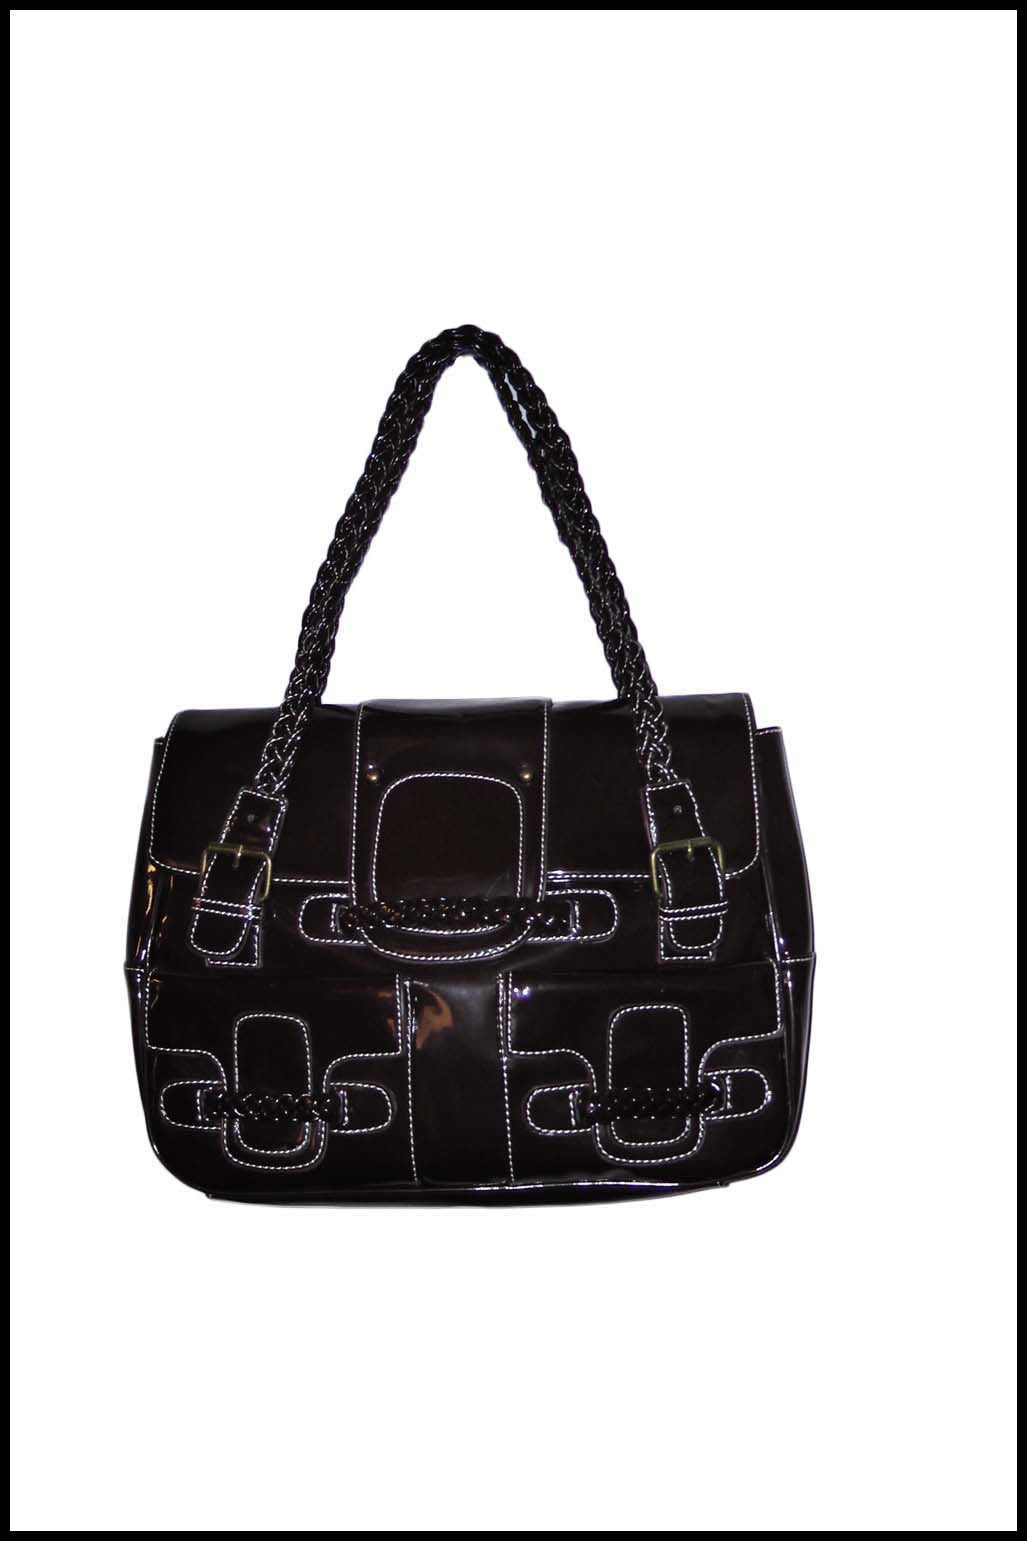 Patent Handbag with White Stitch Detailing and Large Front Pockets